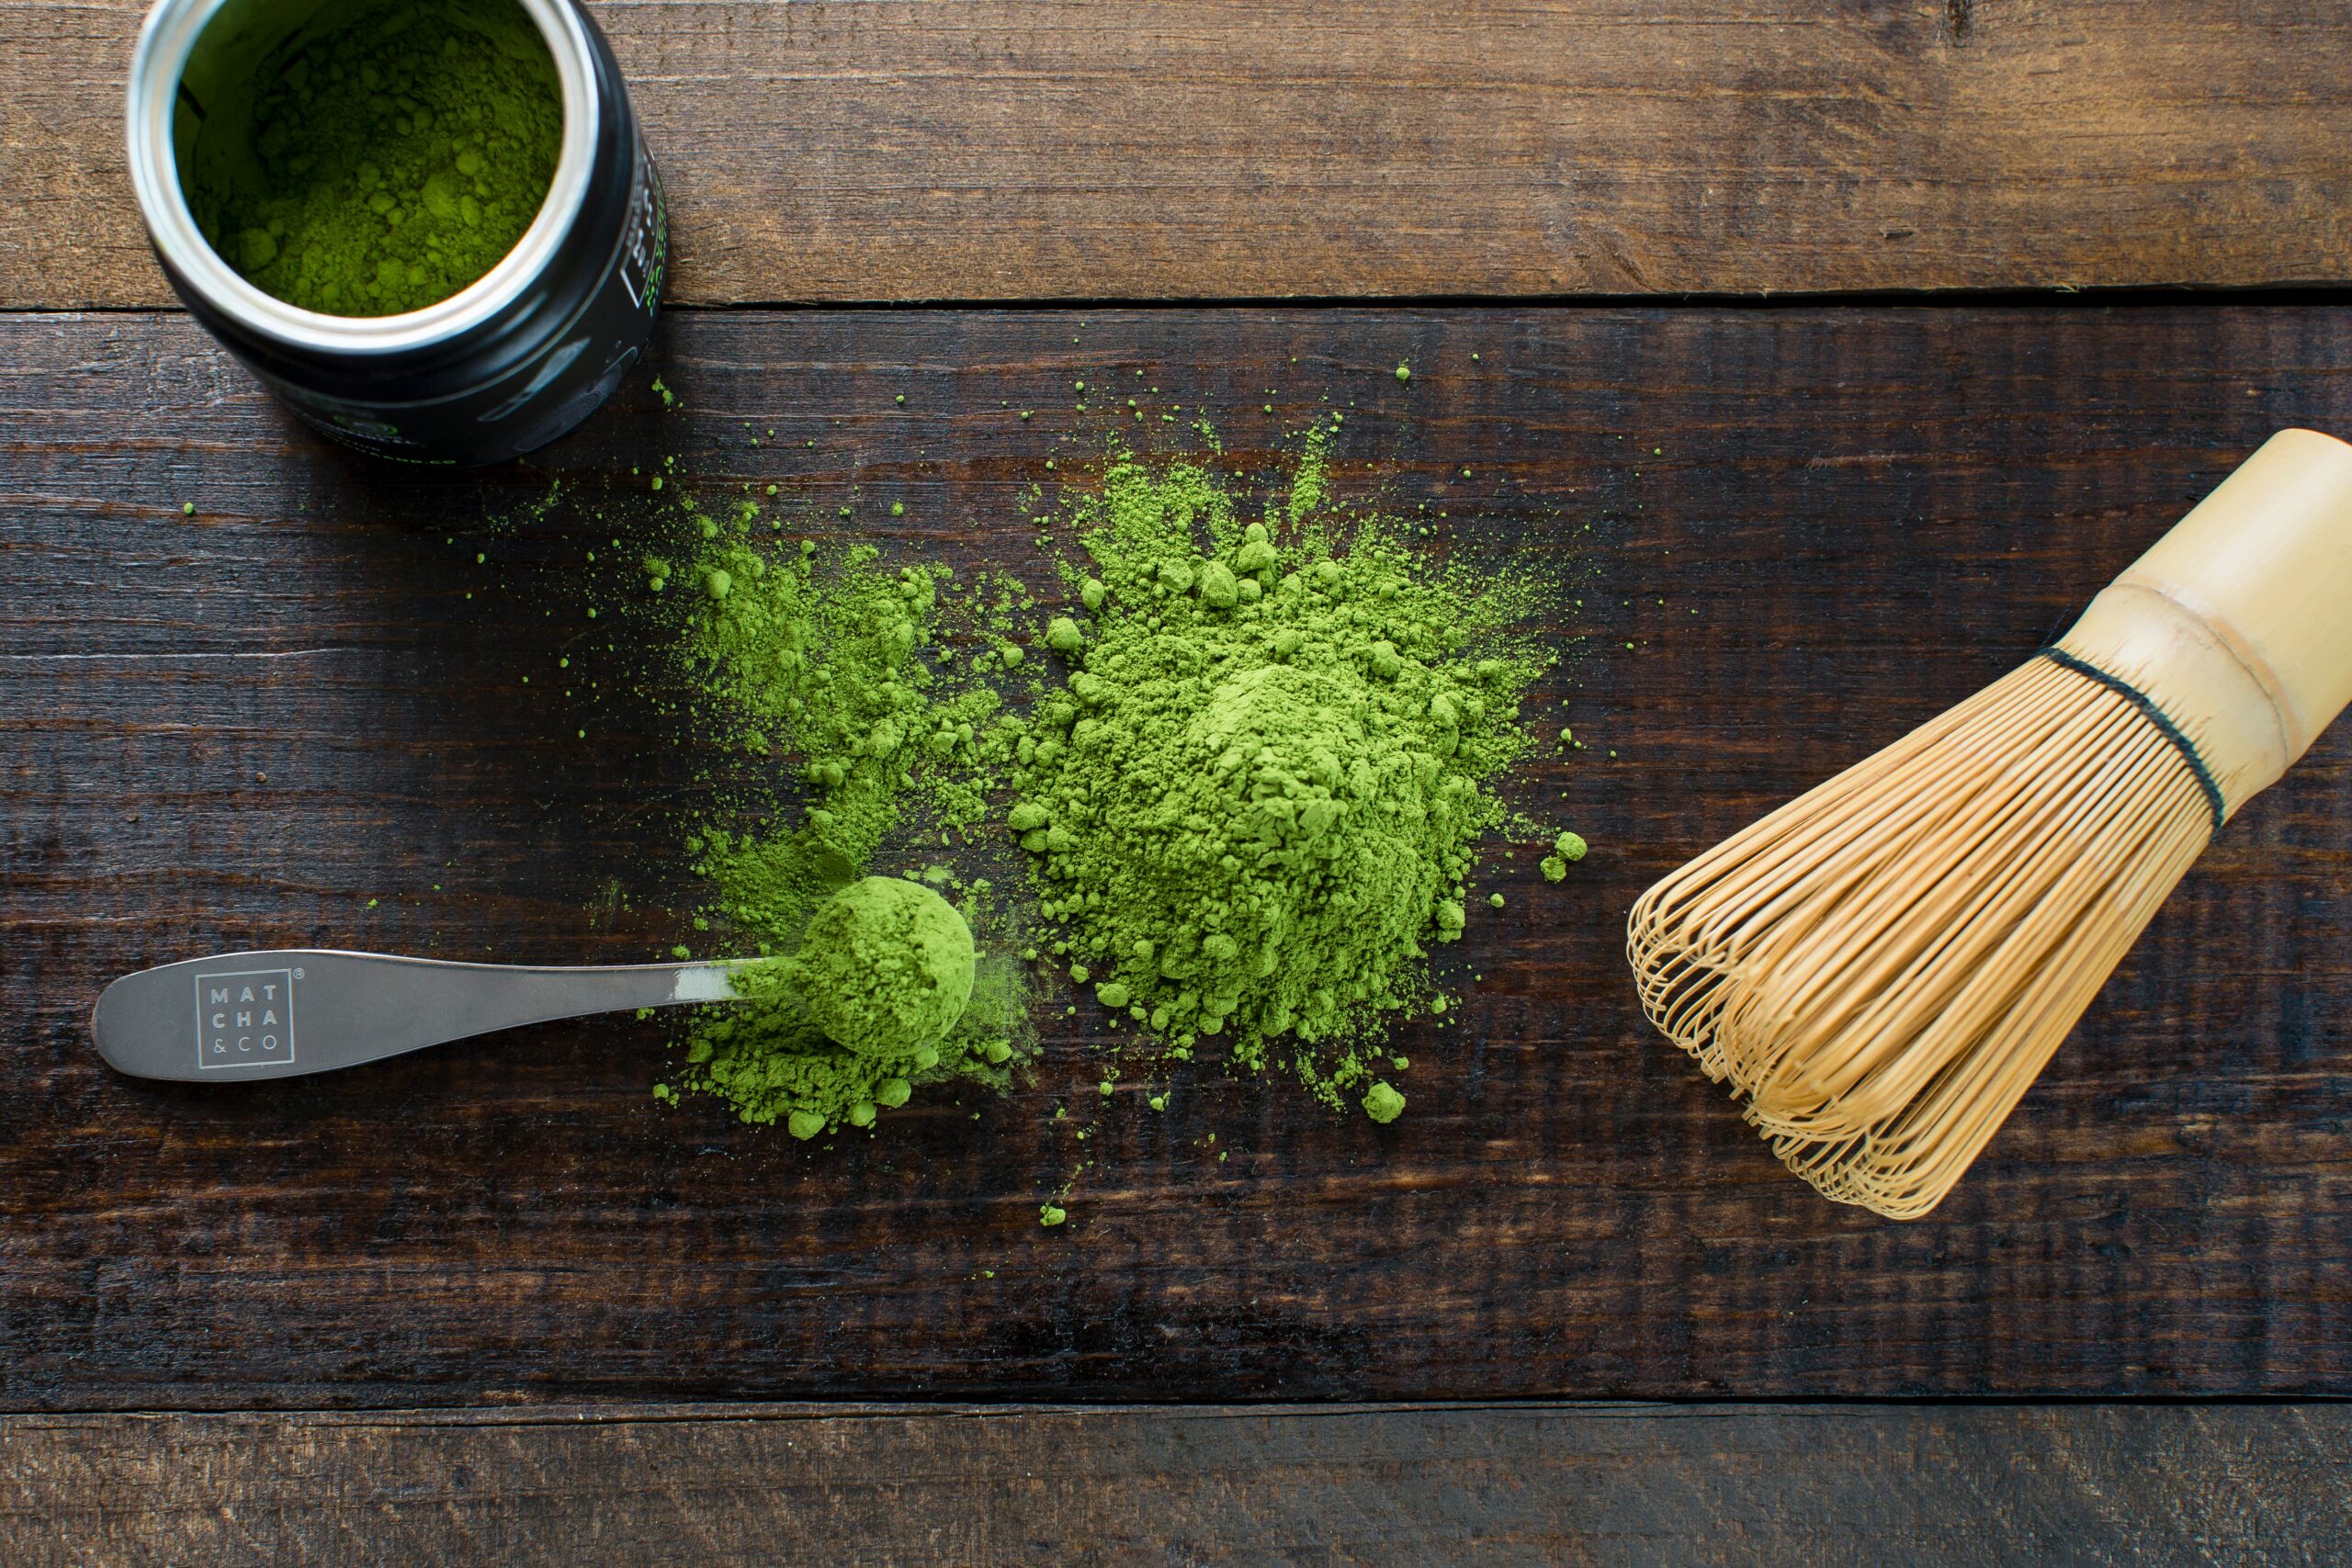 For those who like matcha and coffee, this is the perfect Nespresso recipe. Pictured: Matcha